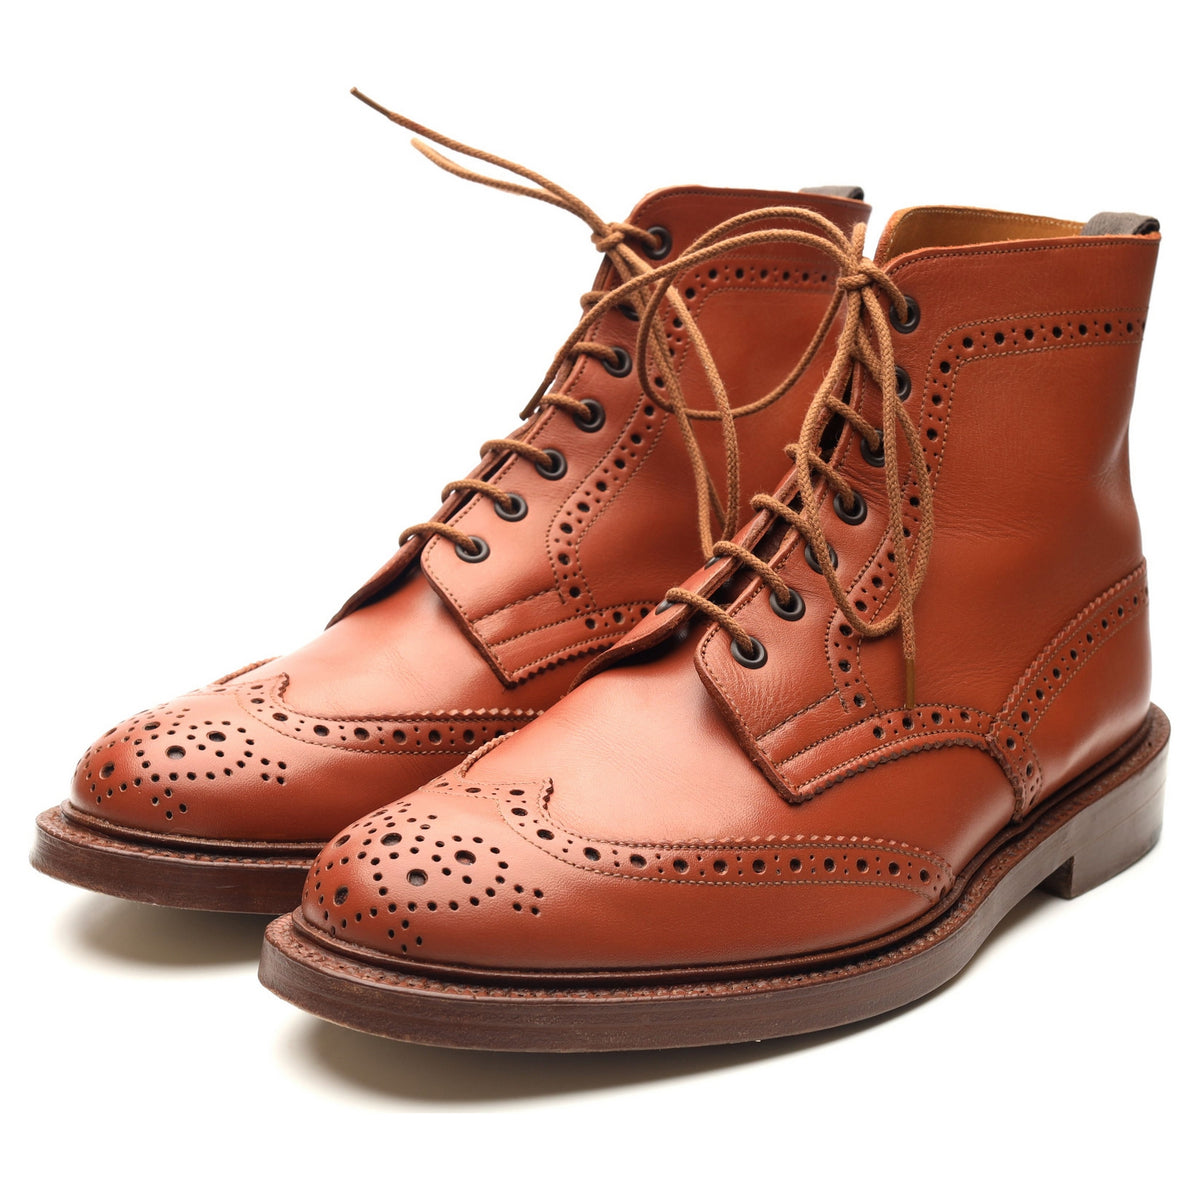 Malton' Tan Brown Leather Brogue Boots UK 10 - Abbot's Shoes